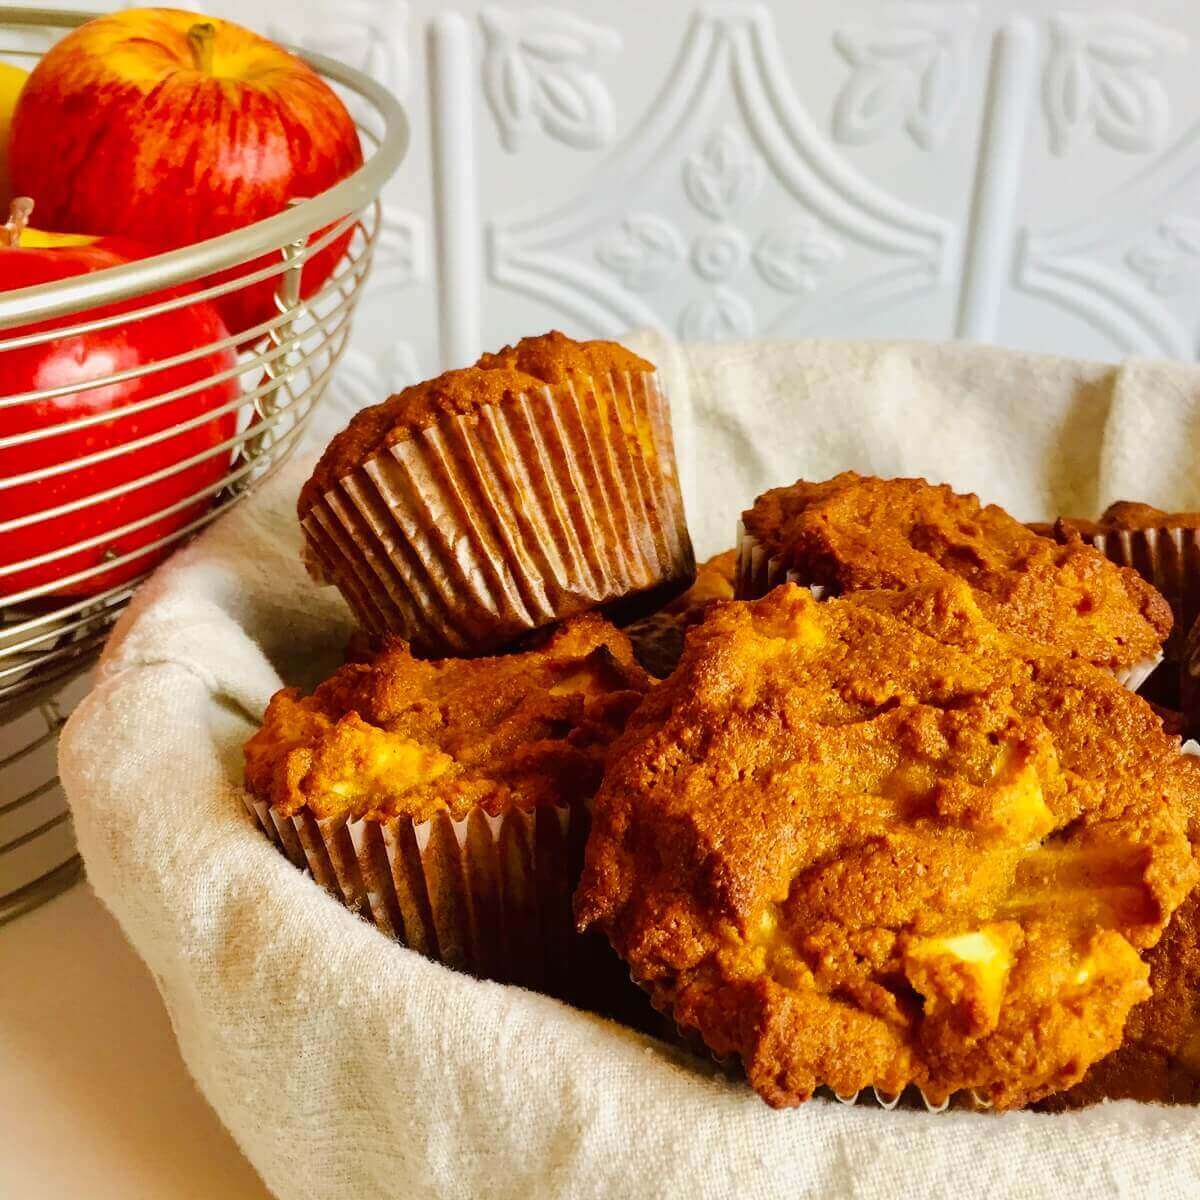 Apple muffins in a basket next to another basket of apples.